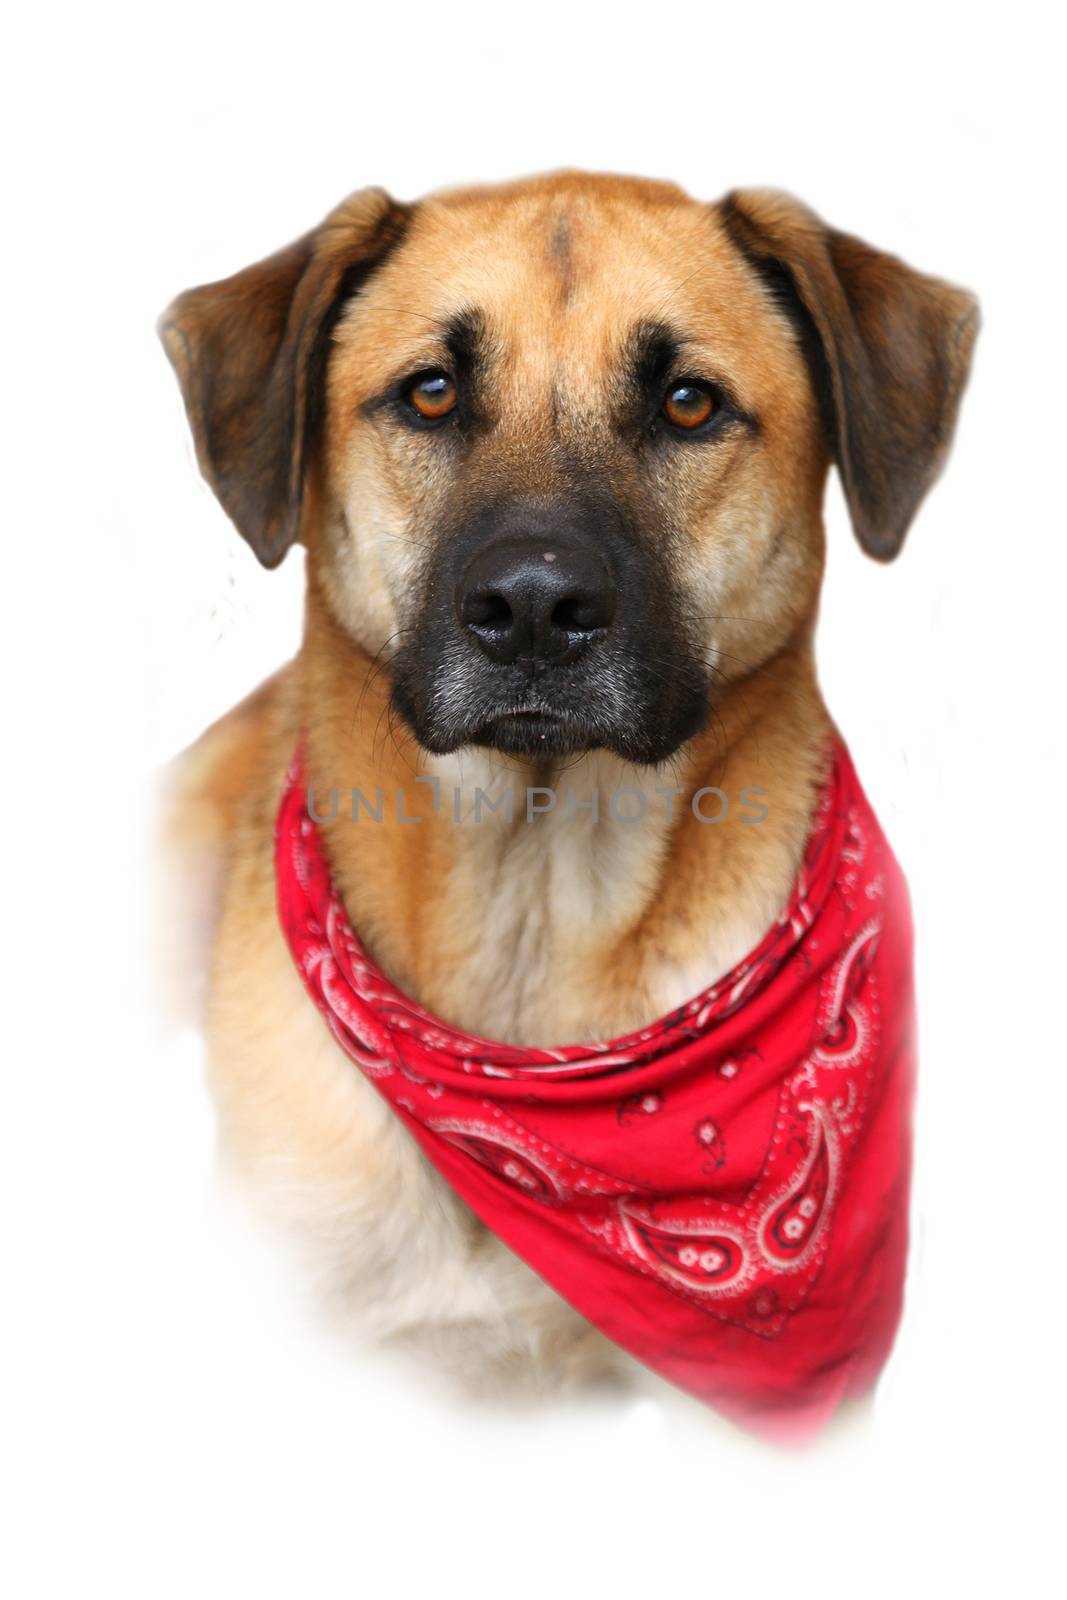 Large mixed breed dog on white background by gvictoria